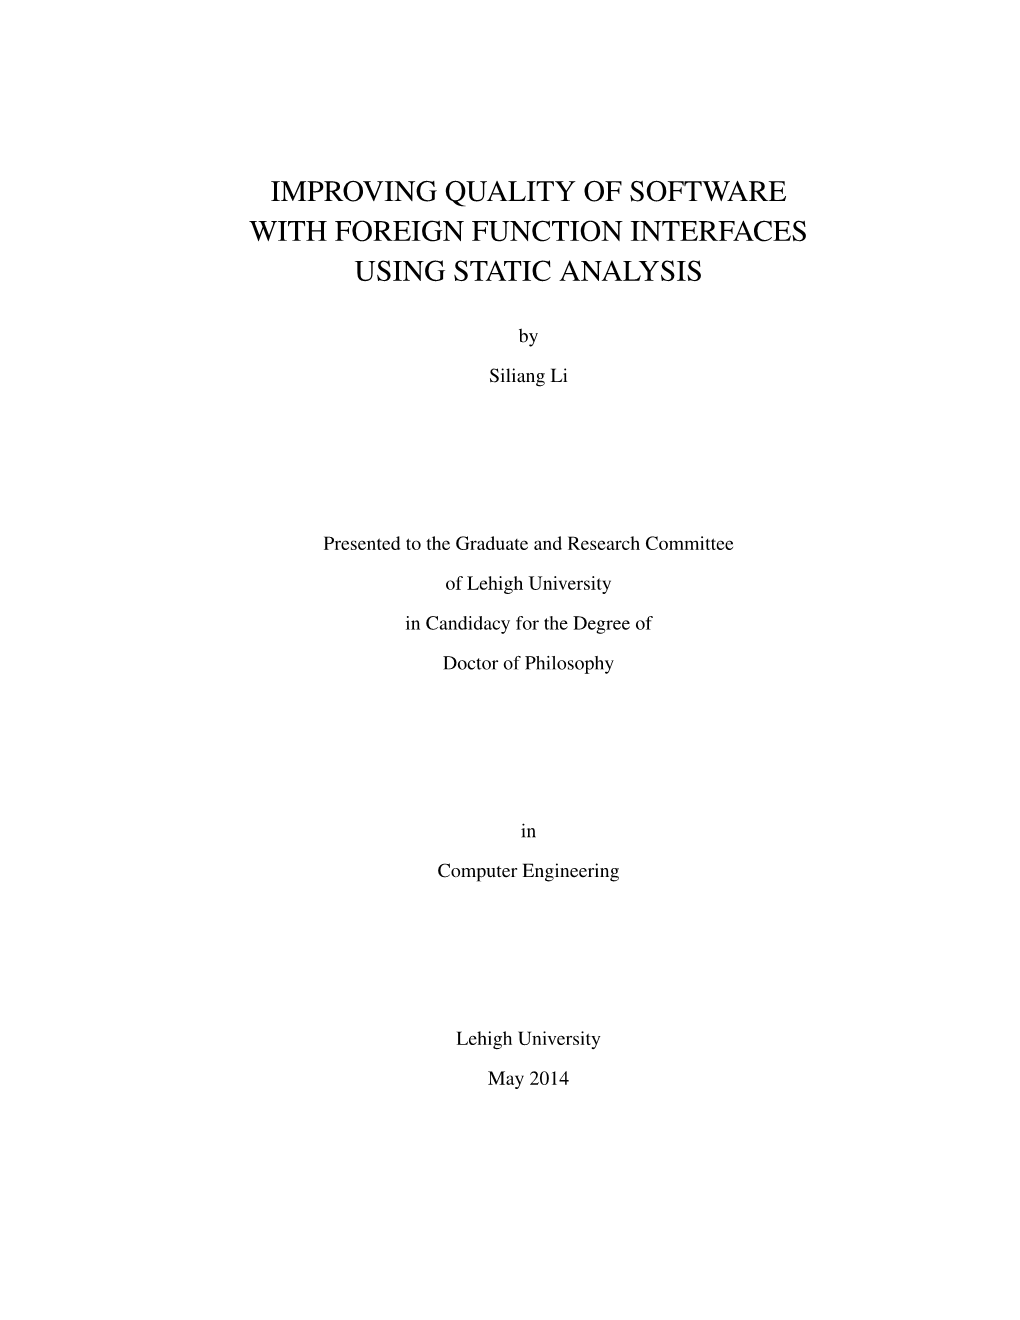 Improving Quality of Software with Foreign Function Interfaces Using Static Analysis